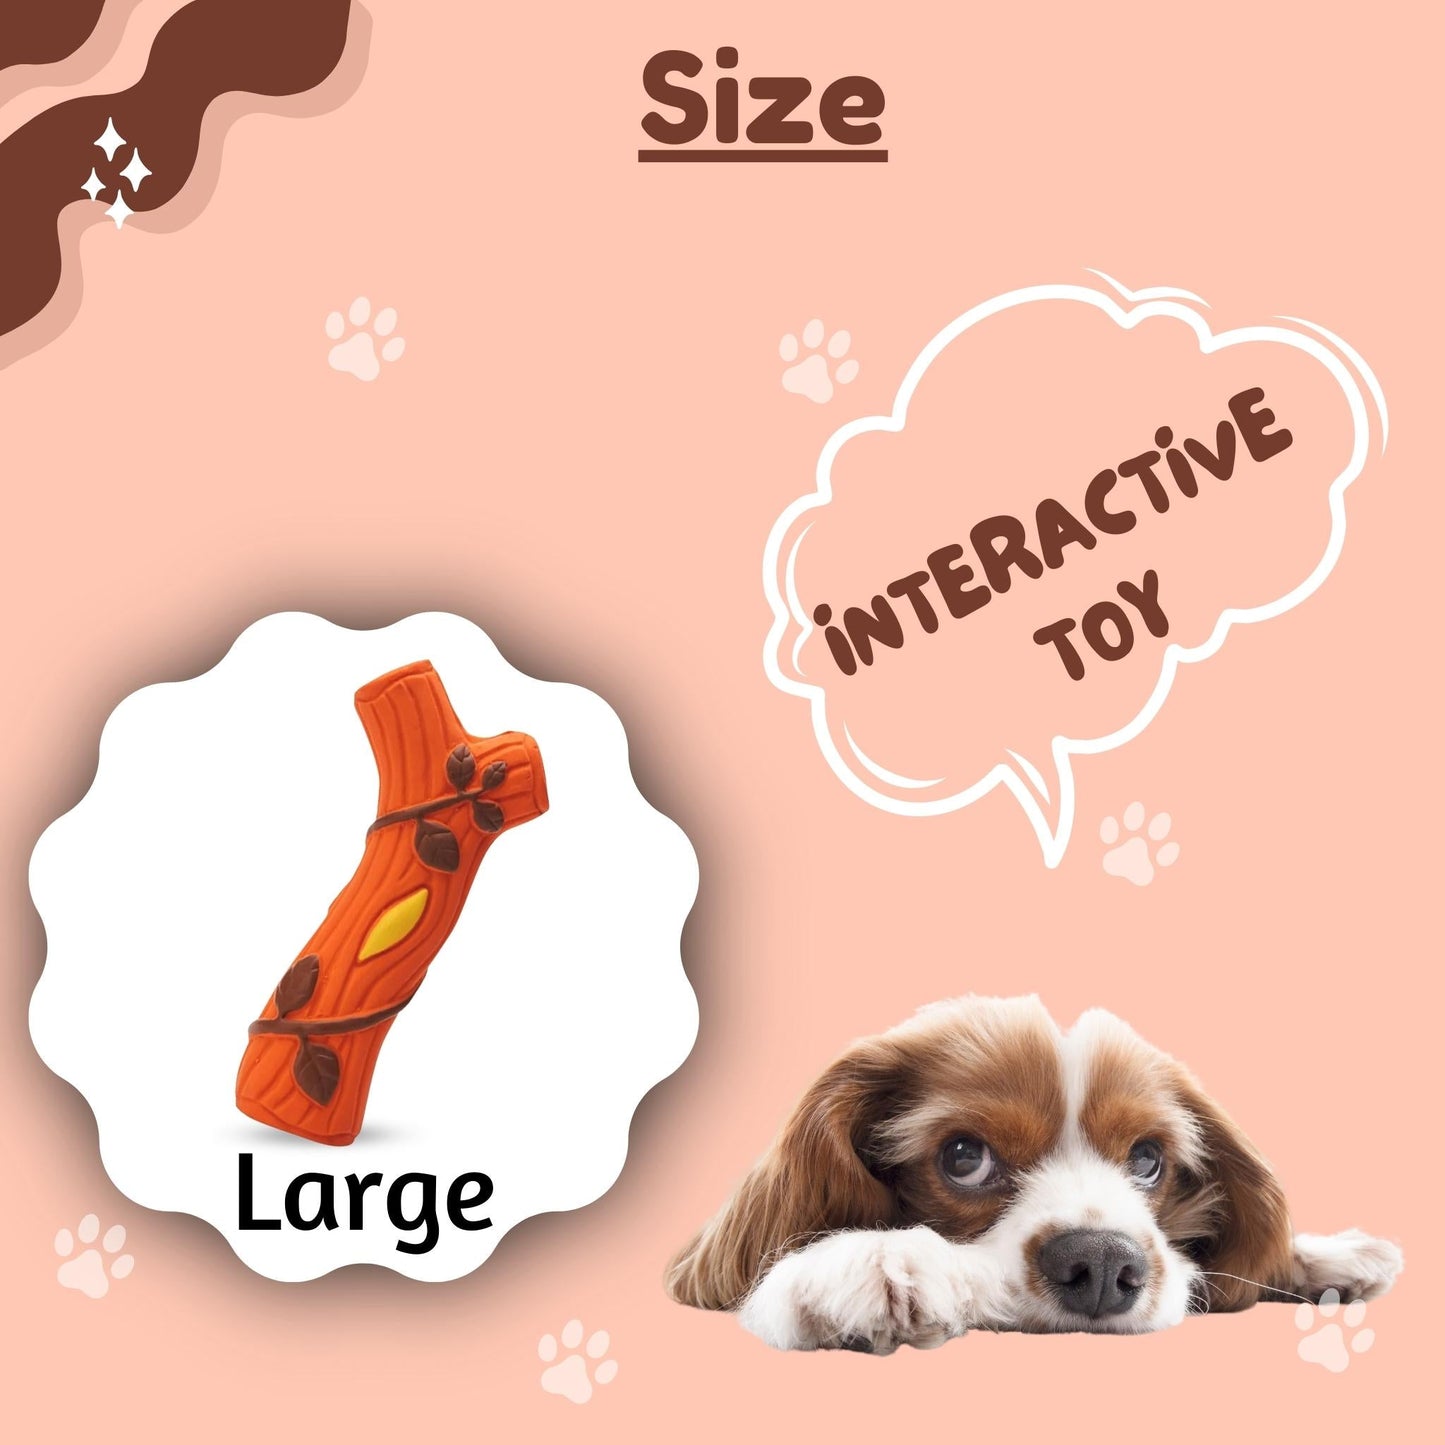 Foodie Puppies Latex Squeaky Toy for Dogs & Puppies - Branch, Large